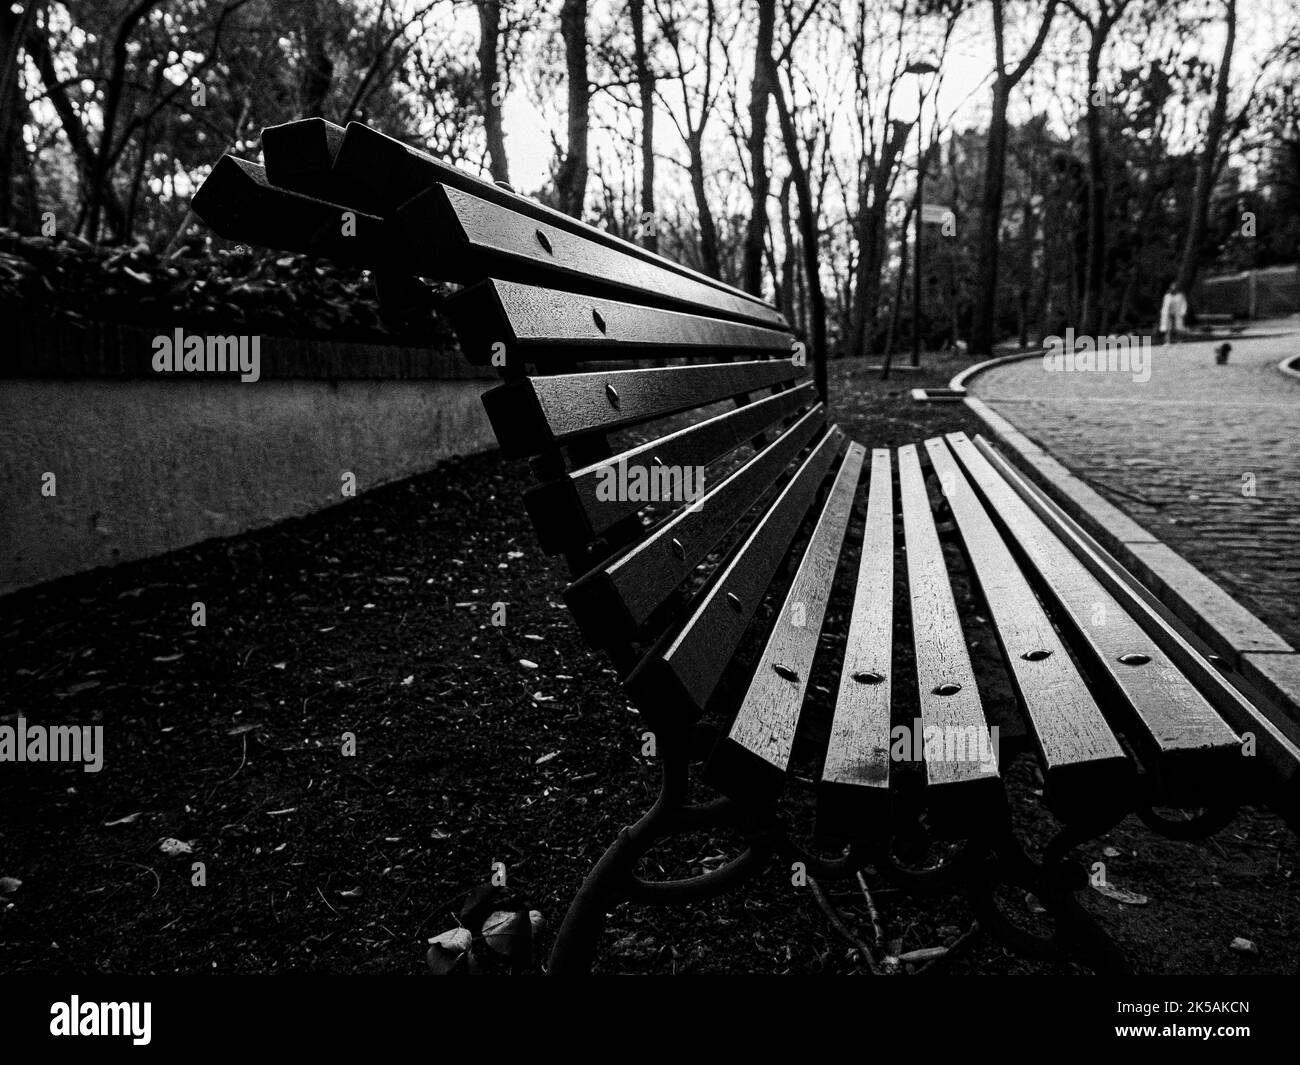 Close-up view of an empty wooden bench outdoors in a park. Stock Photo